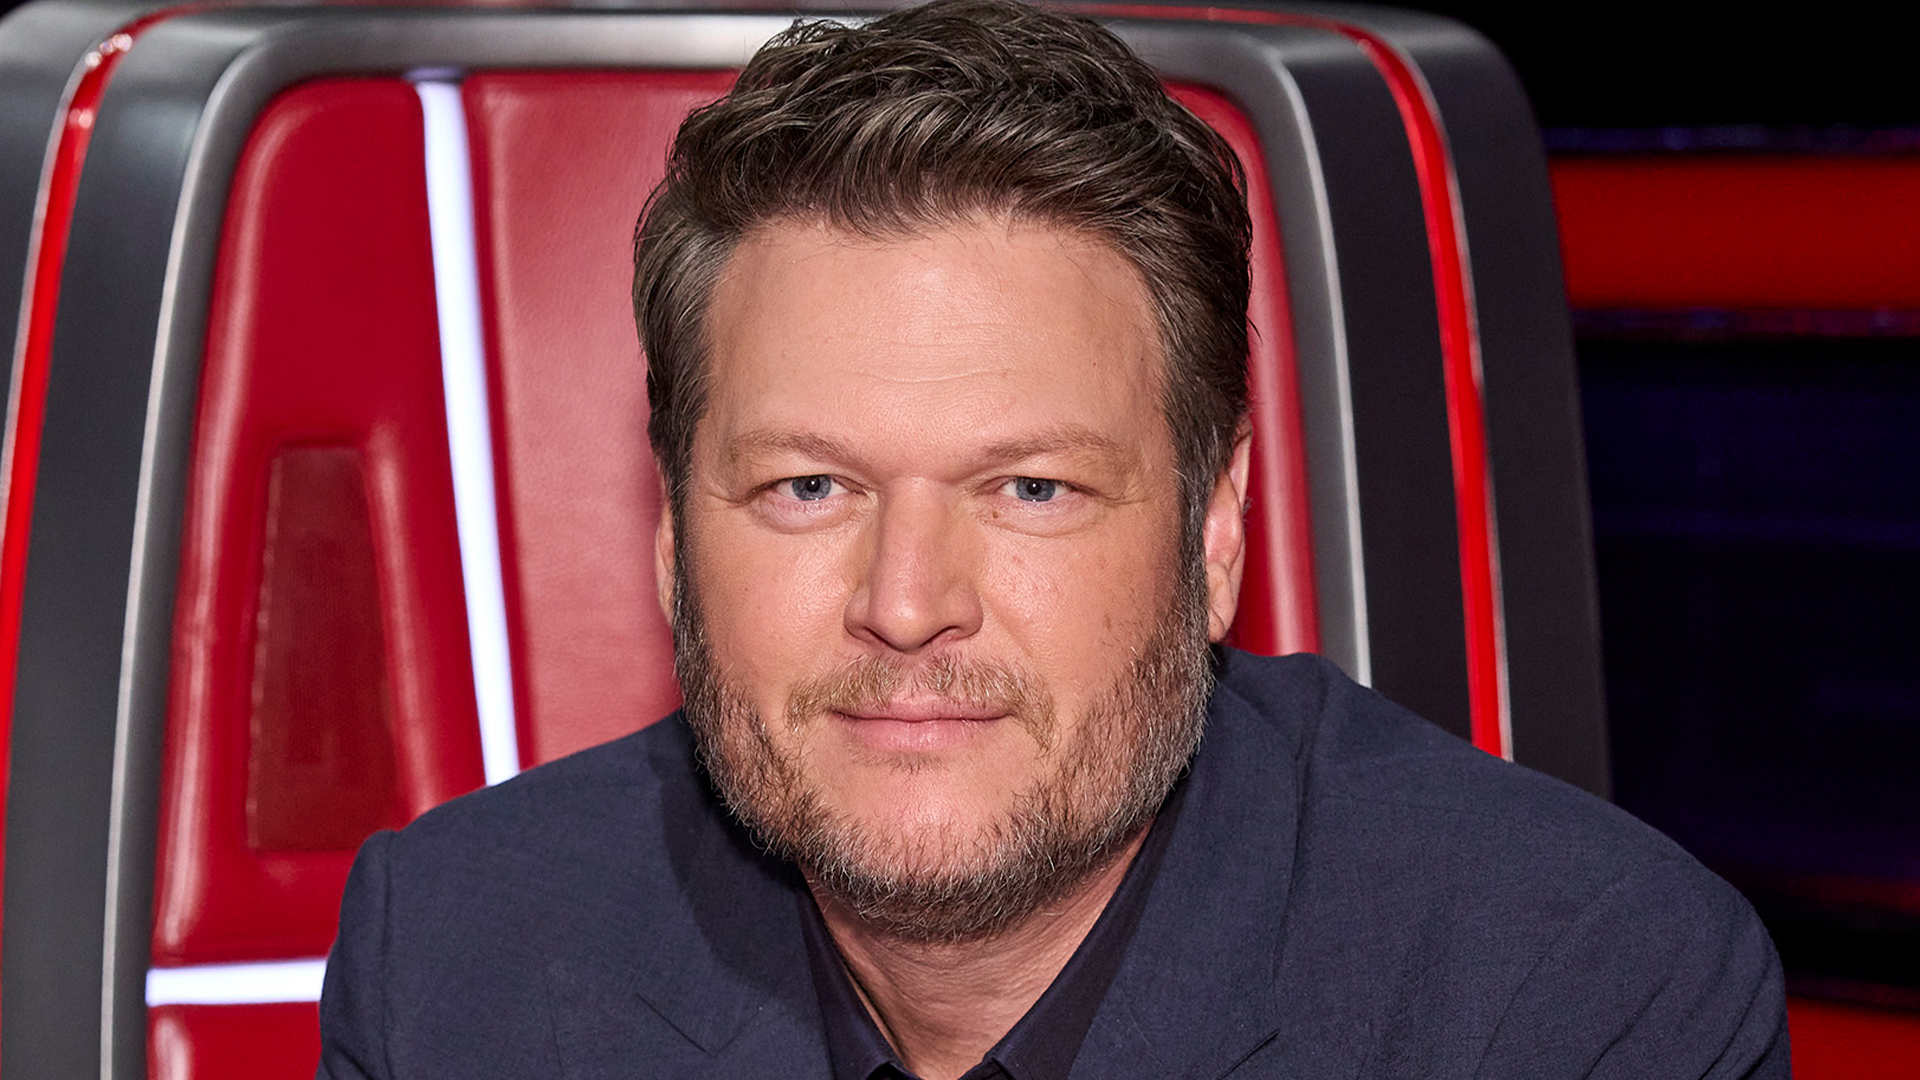 Blake Shelton announces career news without Gwen Stefani after wife snubbed him